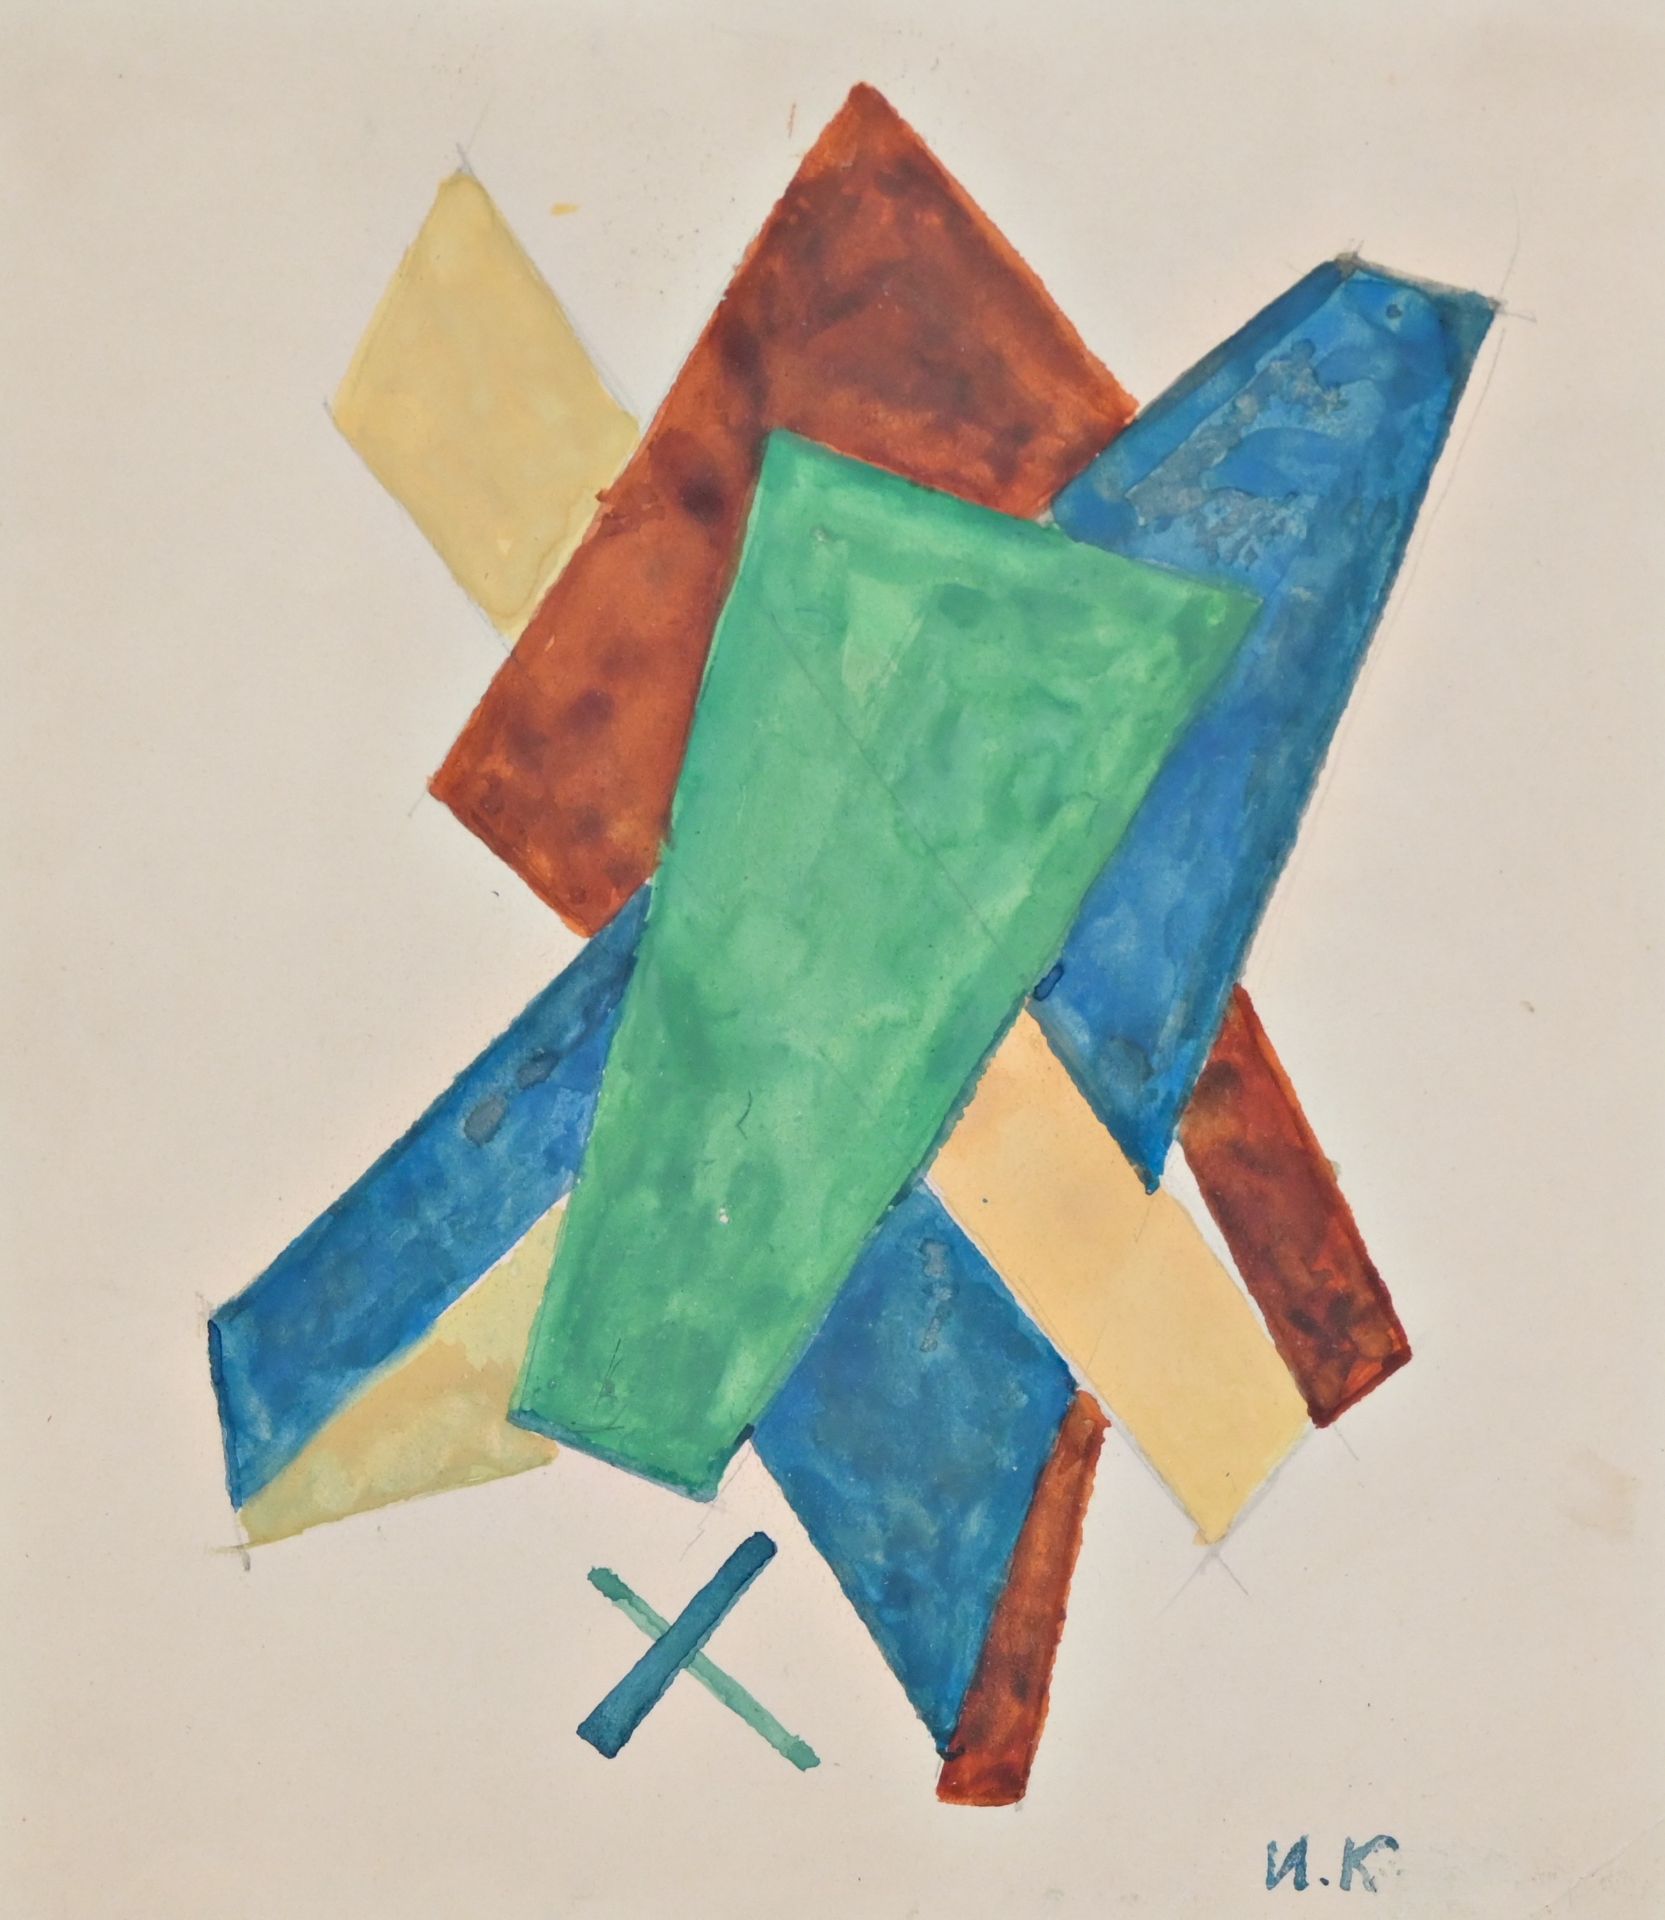 Ivan Vasilievitch KLIUN (1873-1943) "Abstract Composition", watercolor on paper, signed I K. - Image 3 of 5